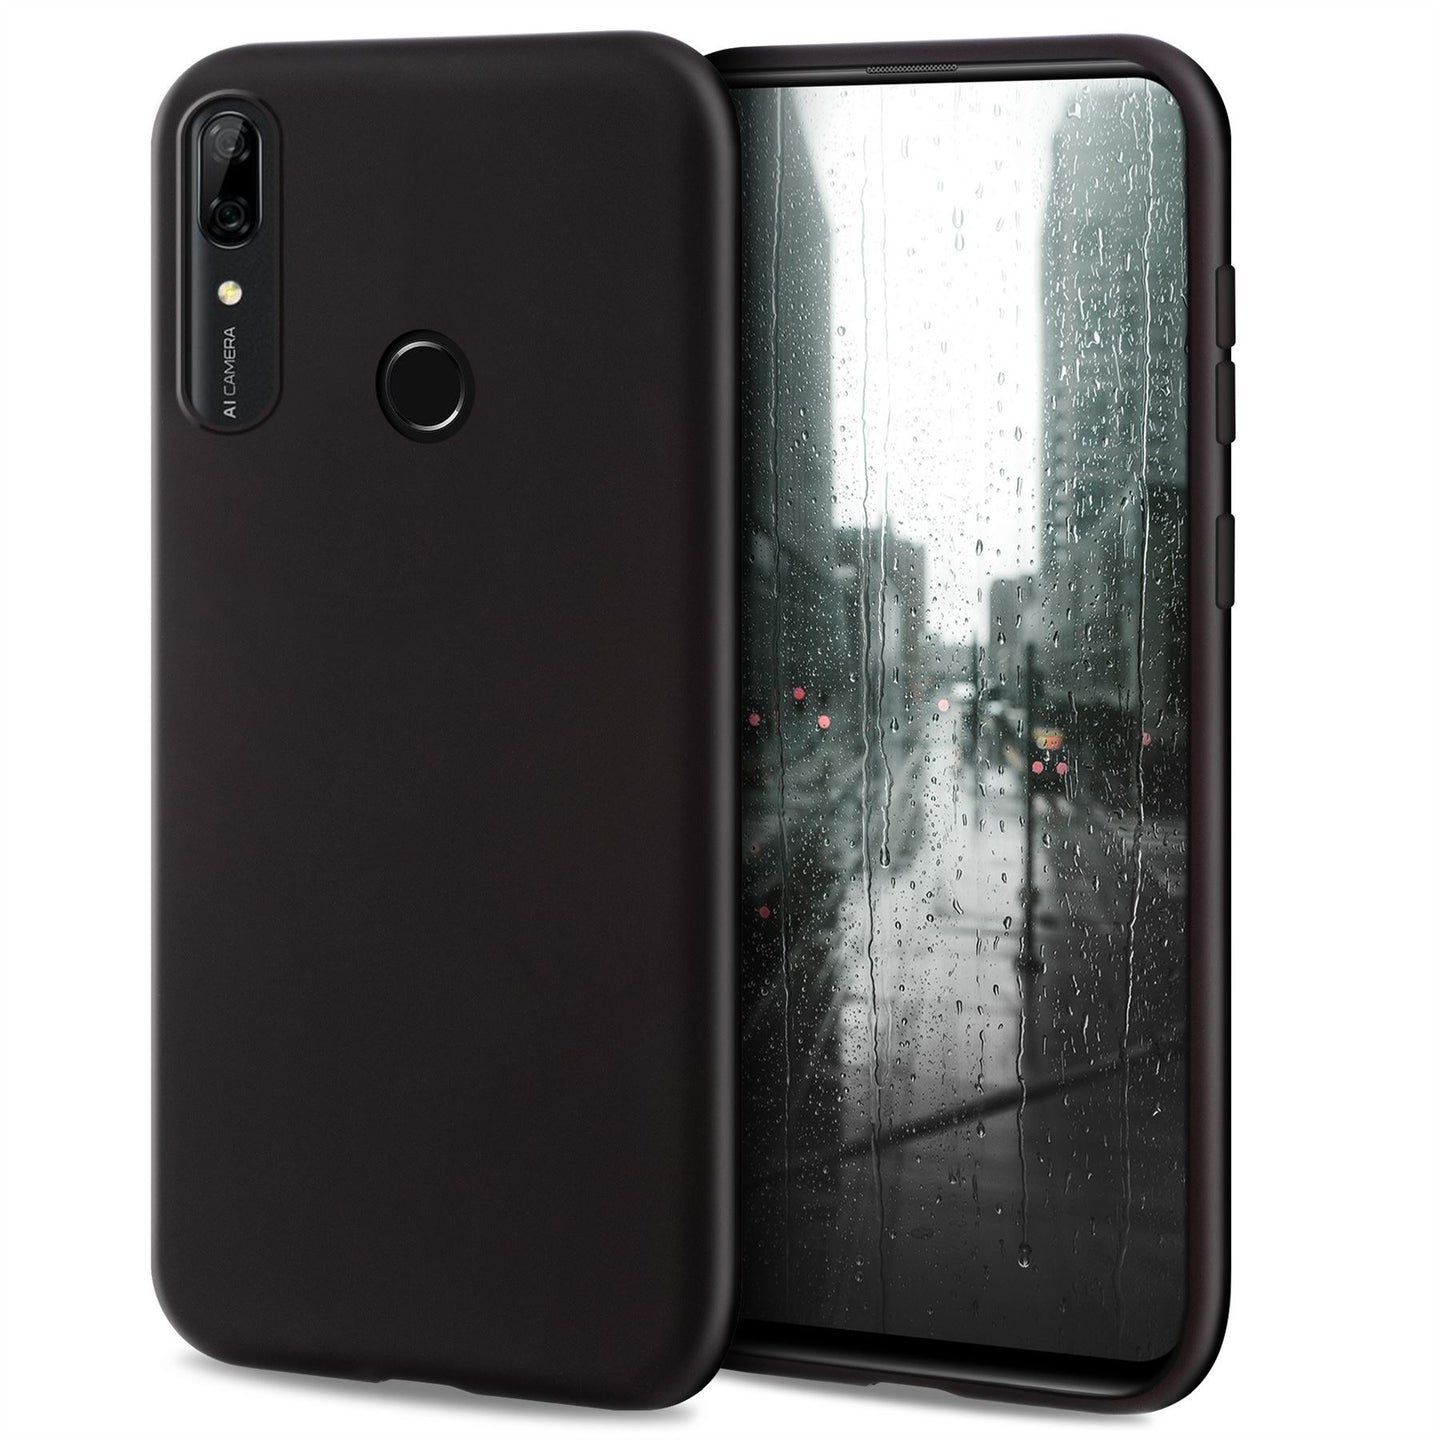 Moozy Minimalist Series Silicone Case for Huawei P Smart Z and Honor 9X, Black - Matte Finish Slim Soft TPU Cover